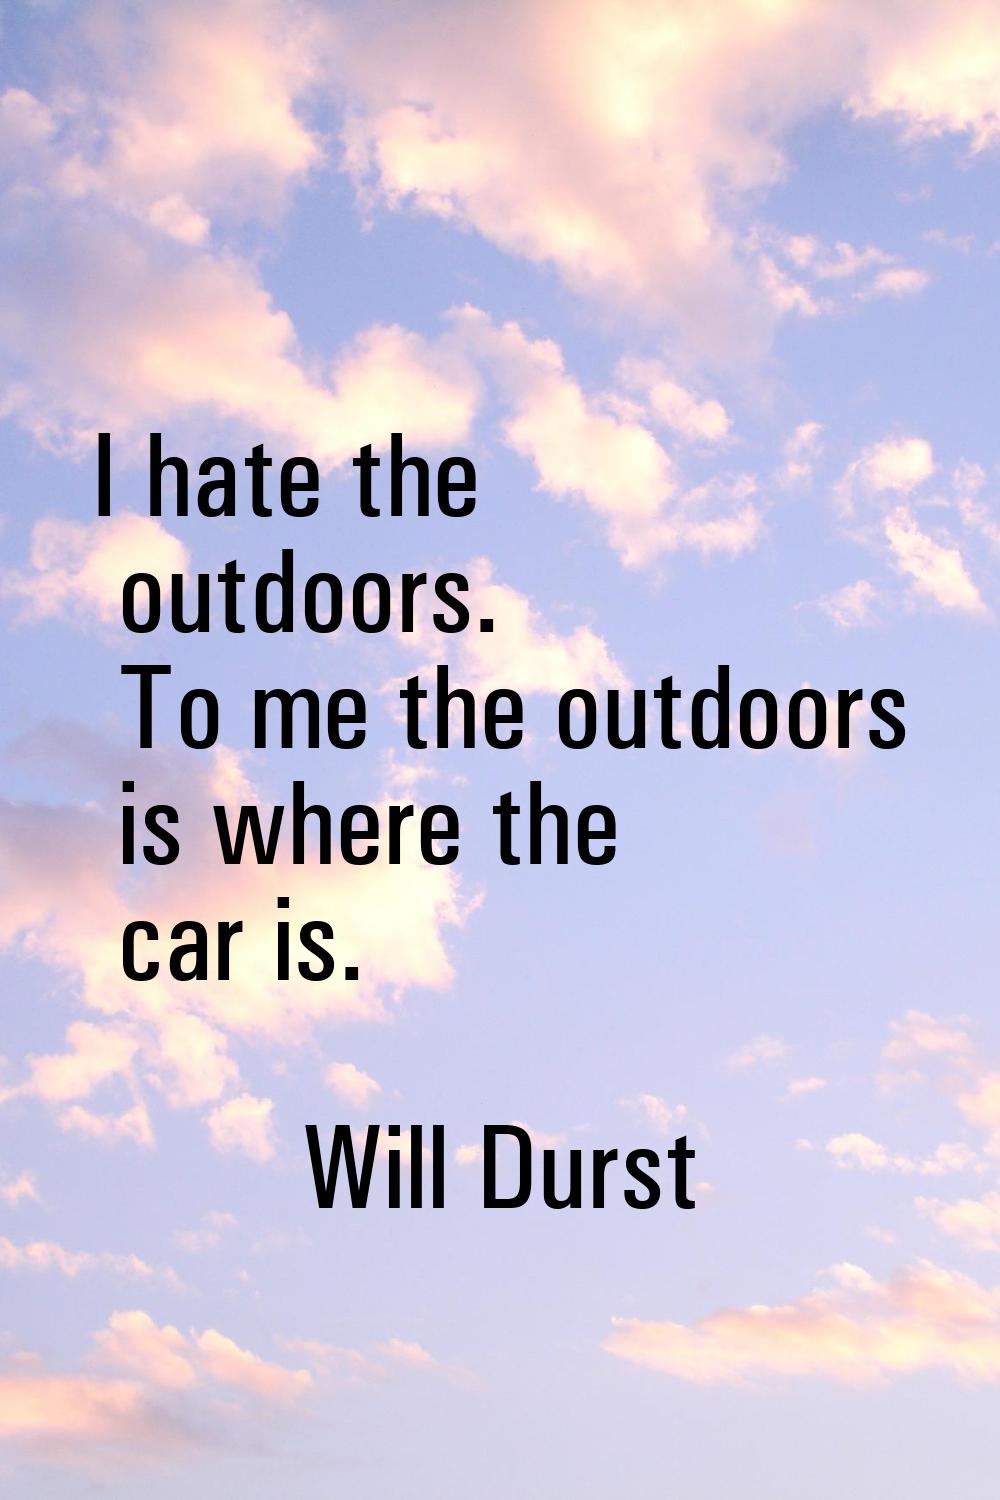 I hate the outdoors. To me the outdoors is where the car is.